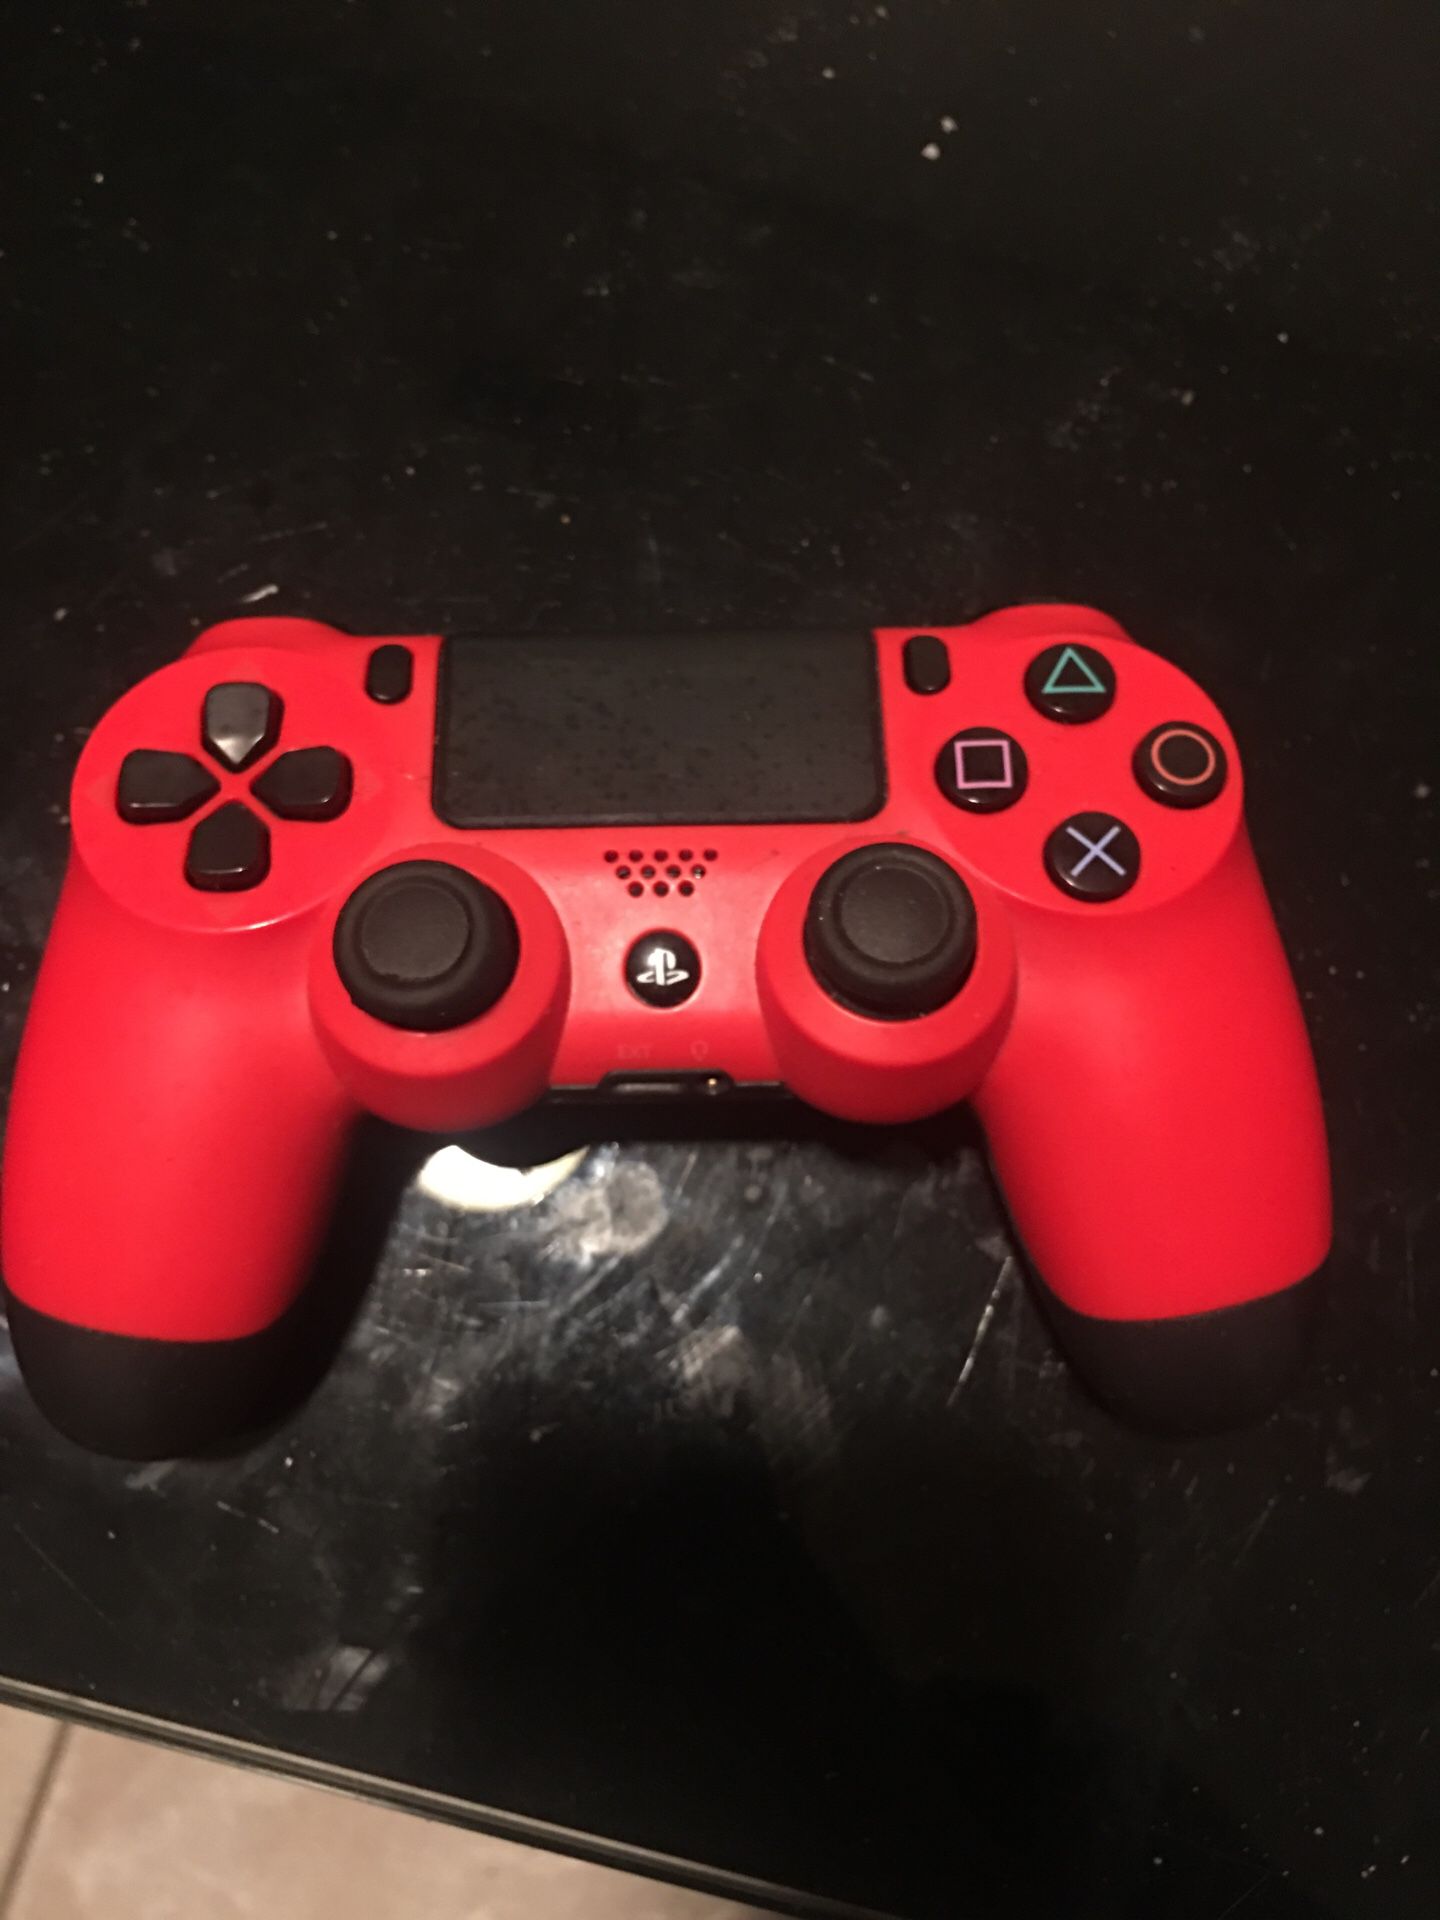 PS4 controller red